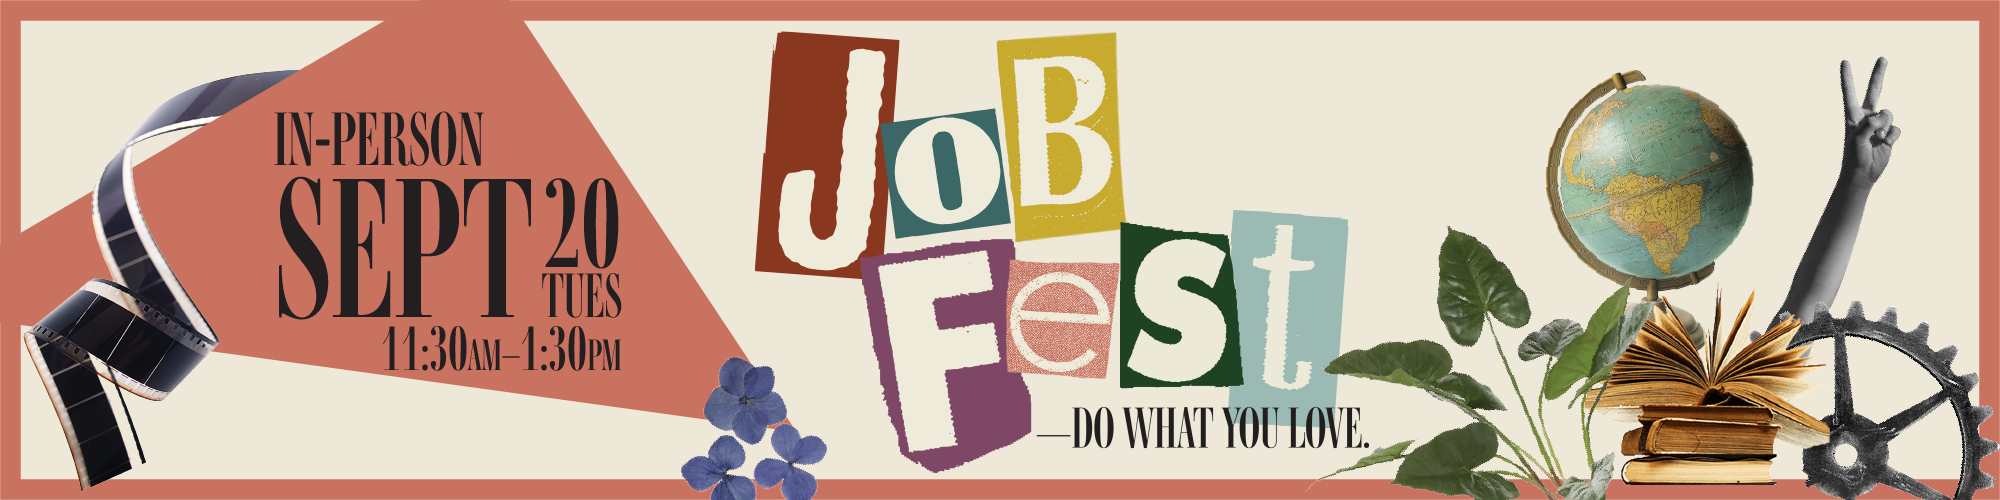 Job Fest: Do What You Love. September 20: In-Person Fair, 11:30 am - 1:30 pm 